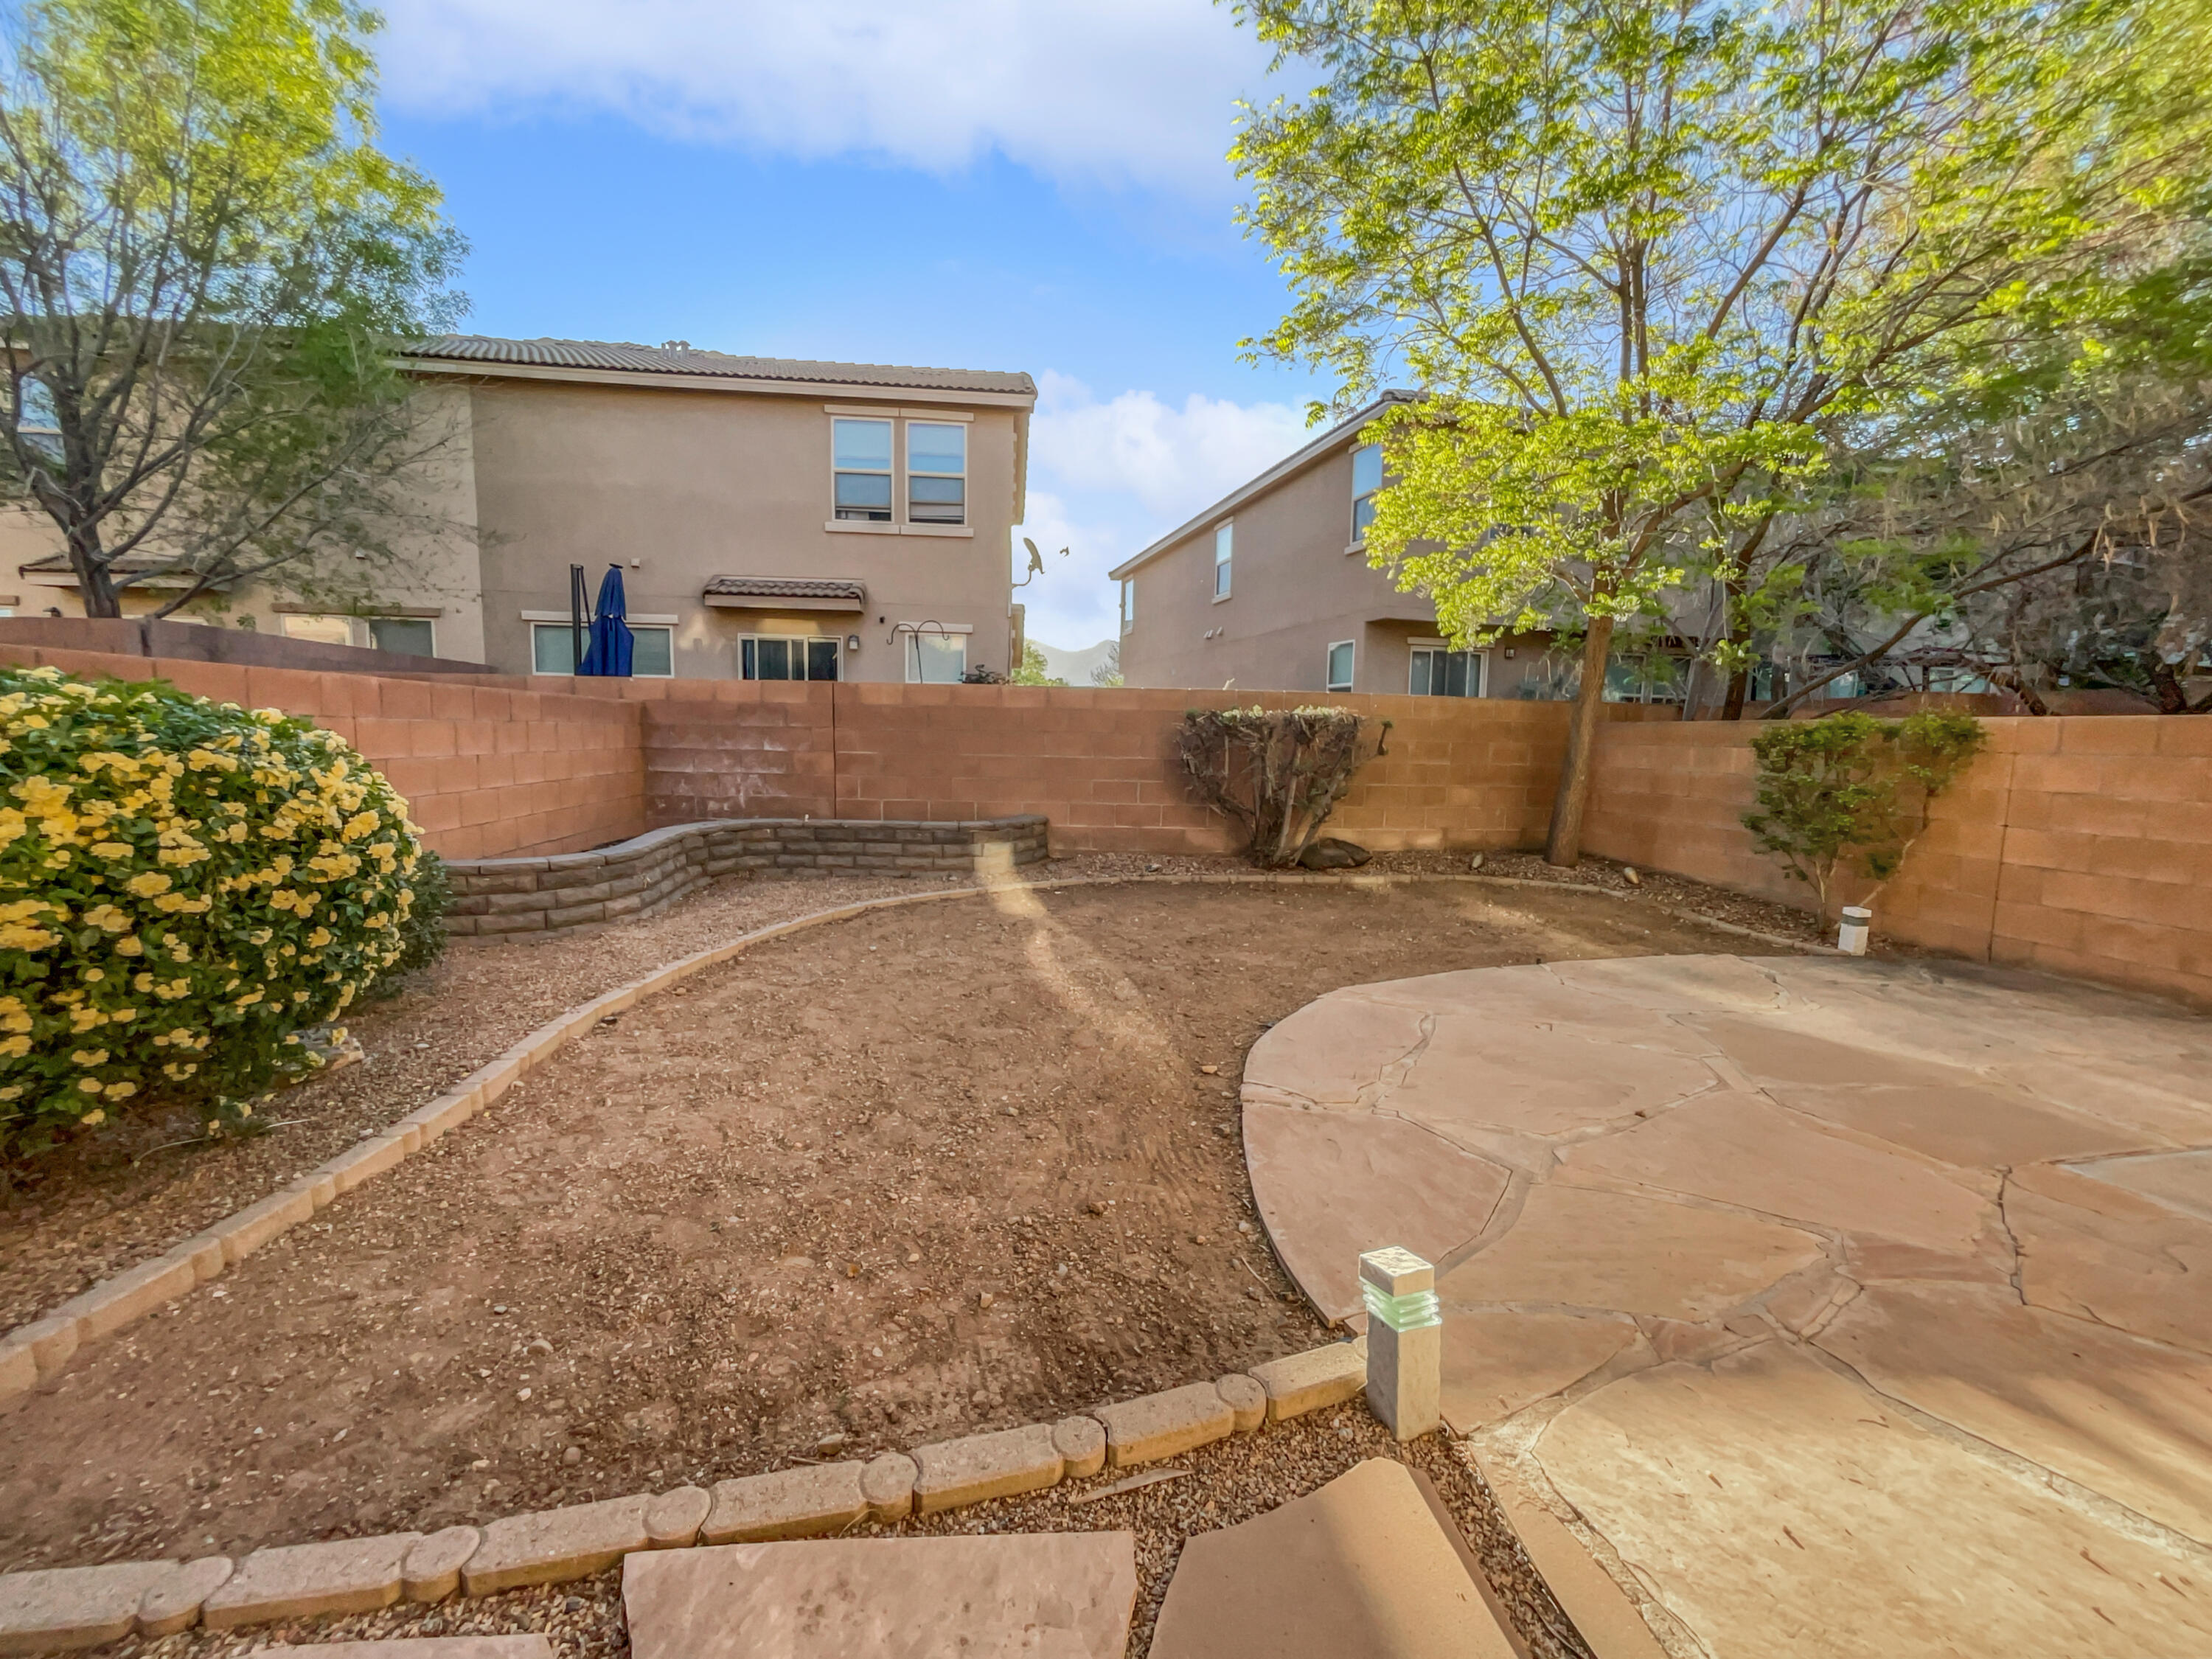 10809 Fort Point Lane NE, Albuquerque, New Mexico 87123, 3 Bedrooms Bedrooms, ,3 BathroomsBathrooms,Residential,For Sale,10809 Fort Point Lane NE,1061501